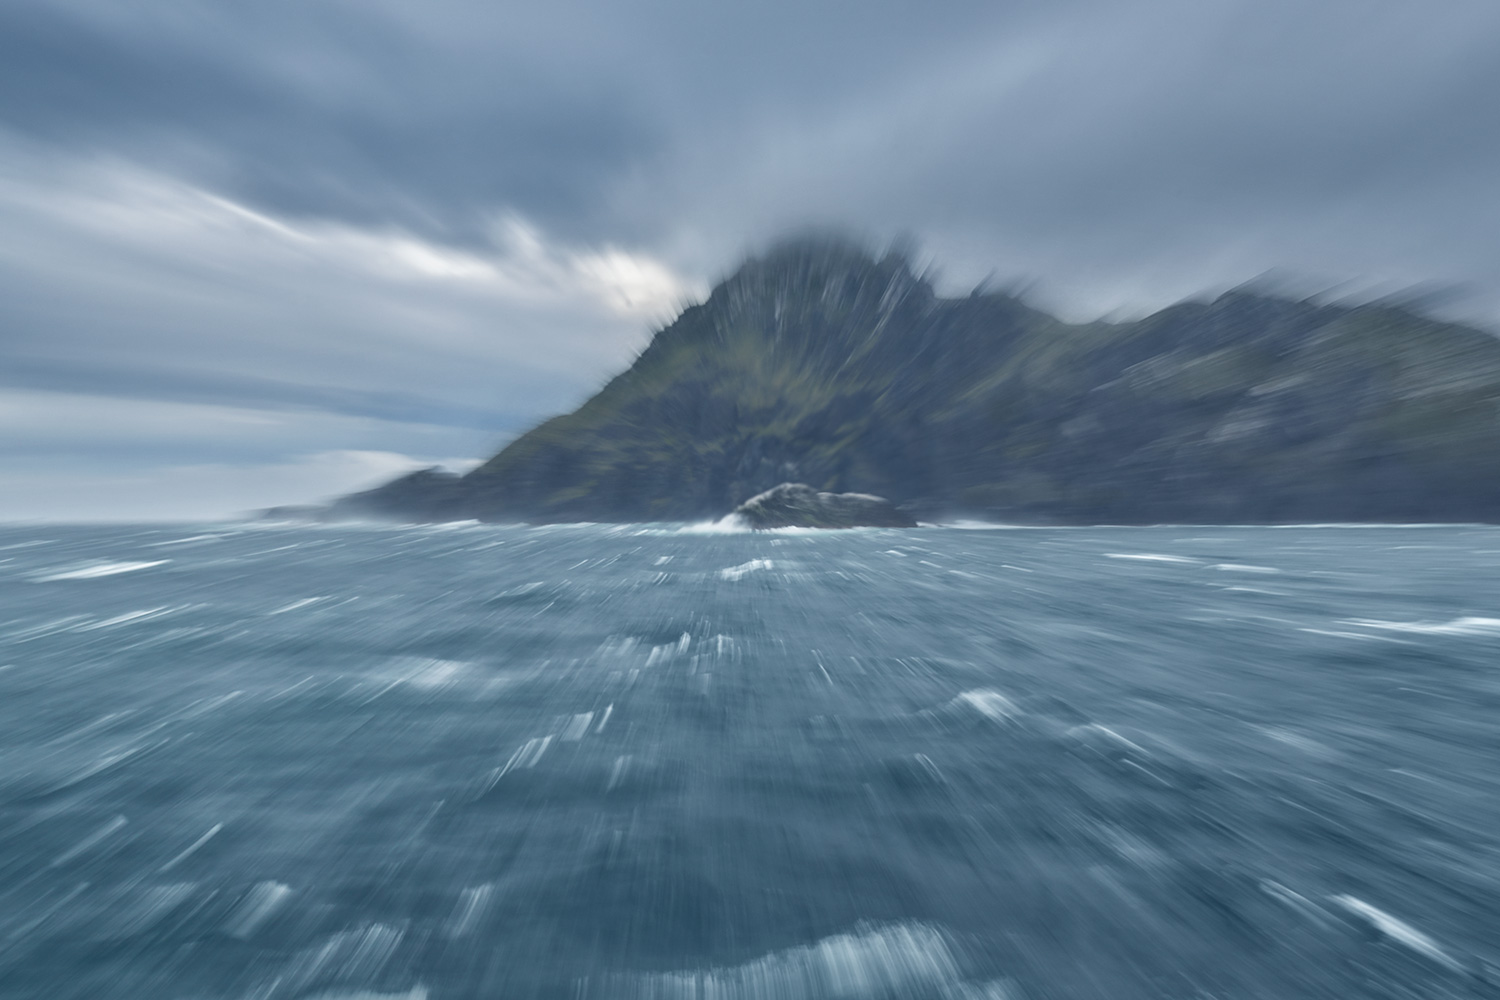 Cape Horn
giclee print on archival paper, limited edition of 25,
90 x 60 cm